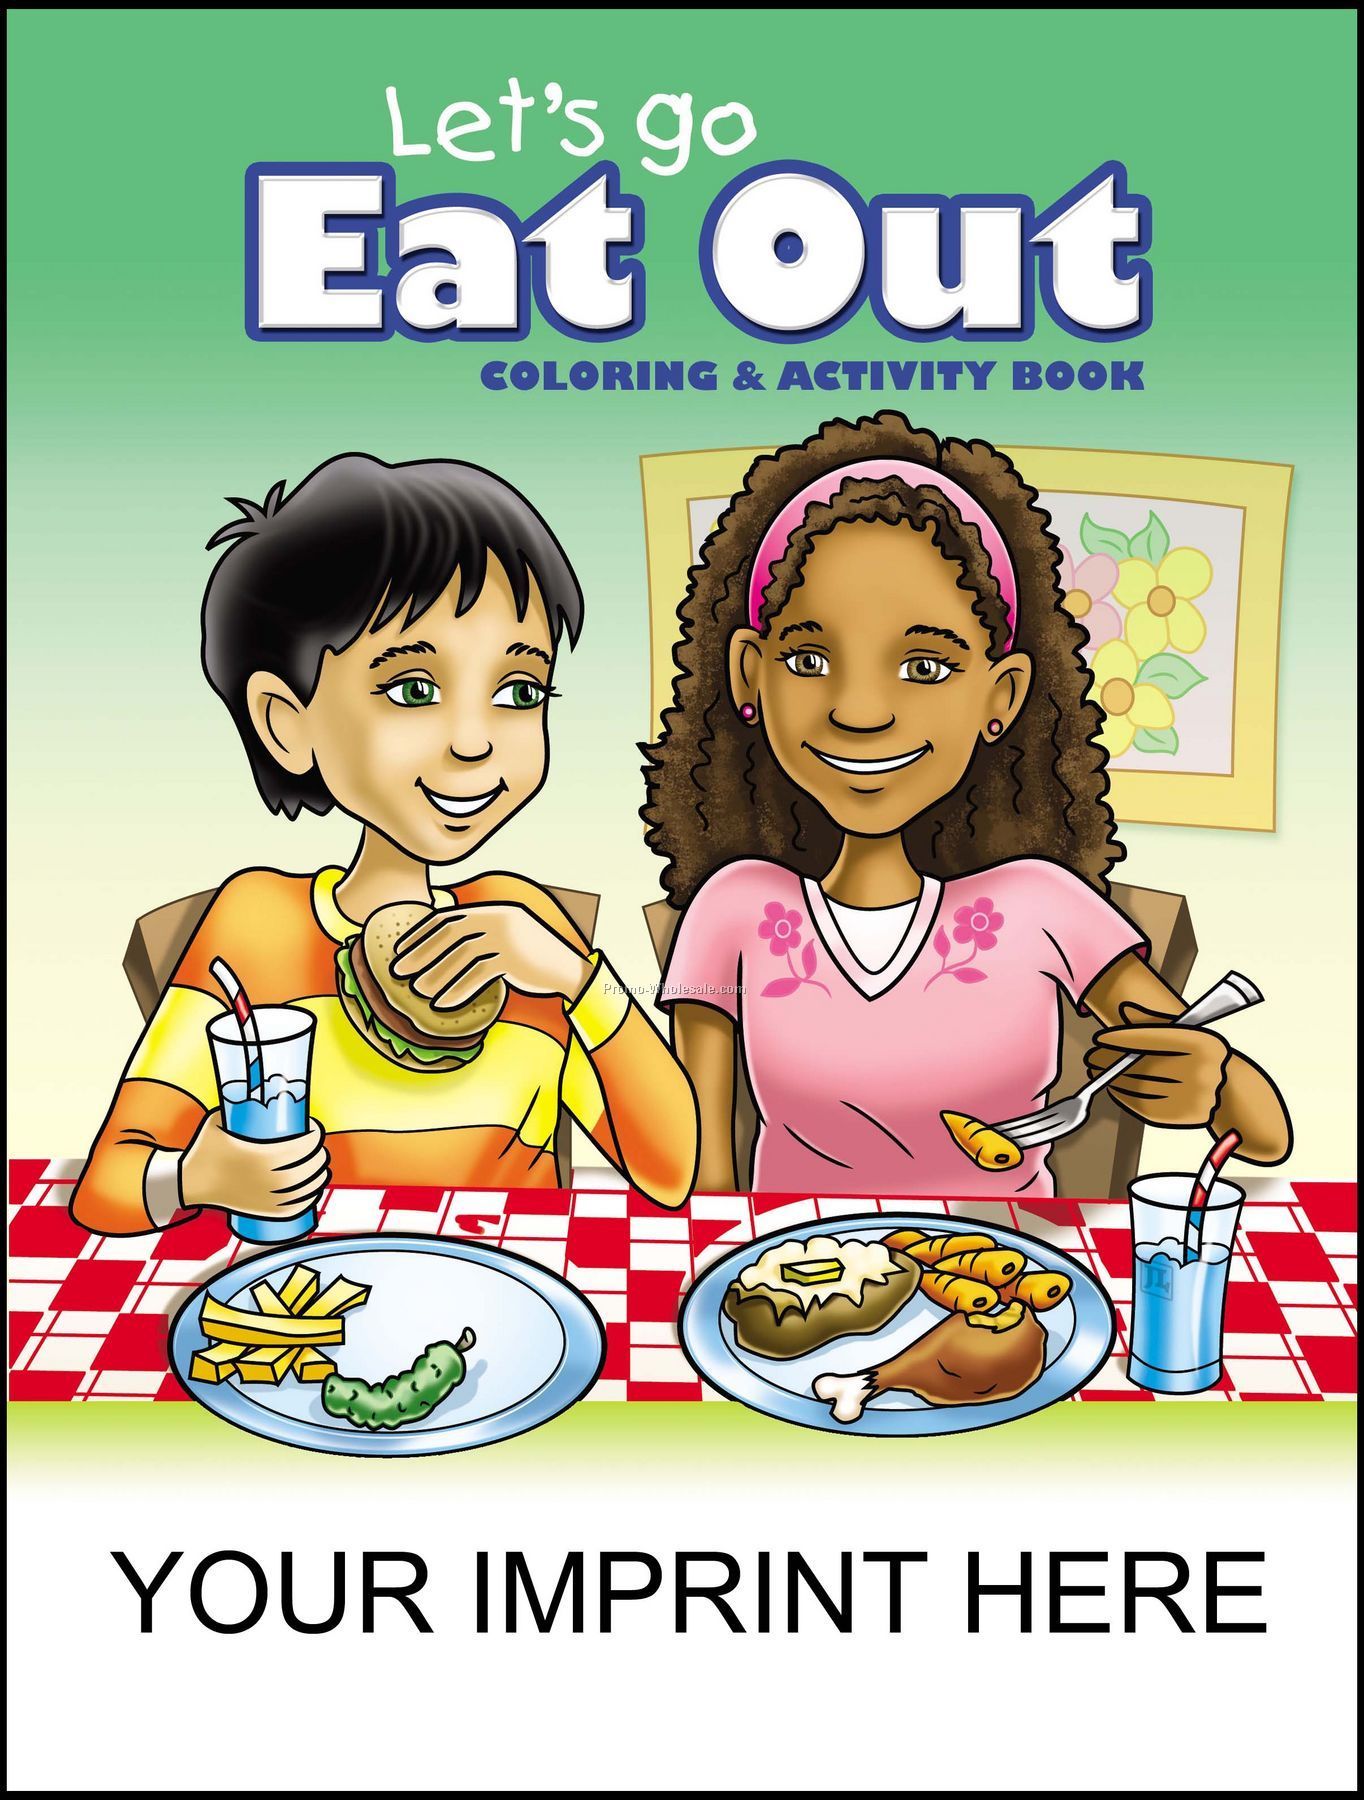 8-3/8"x10-7/8" Lets Go Eat Out Coloring & Activity Book